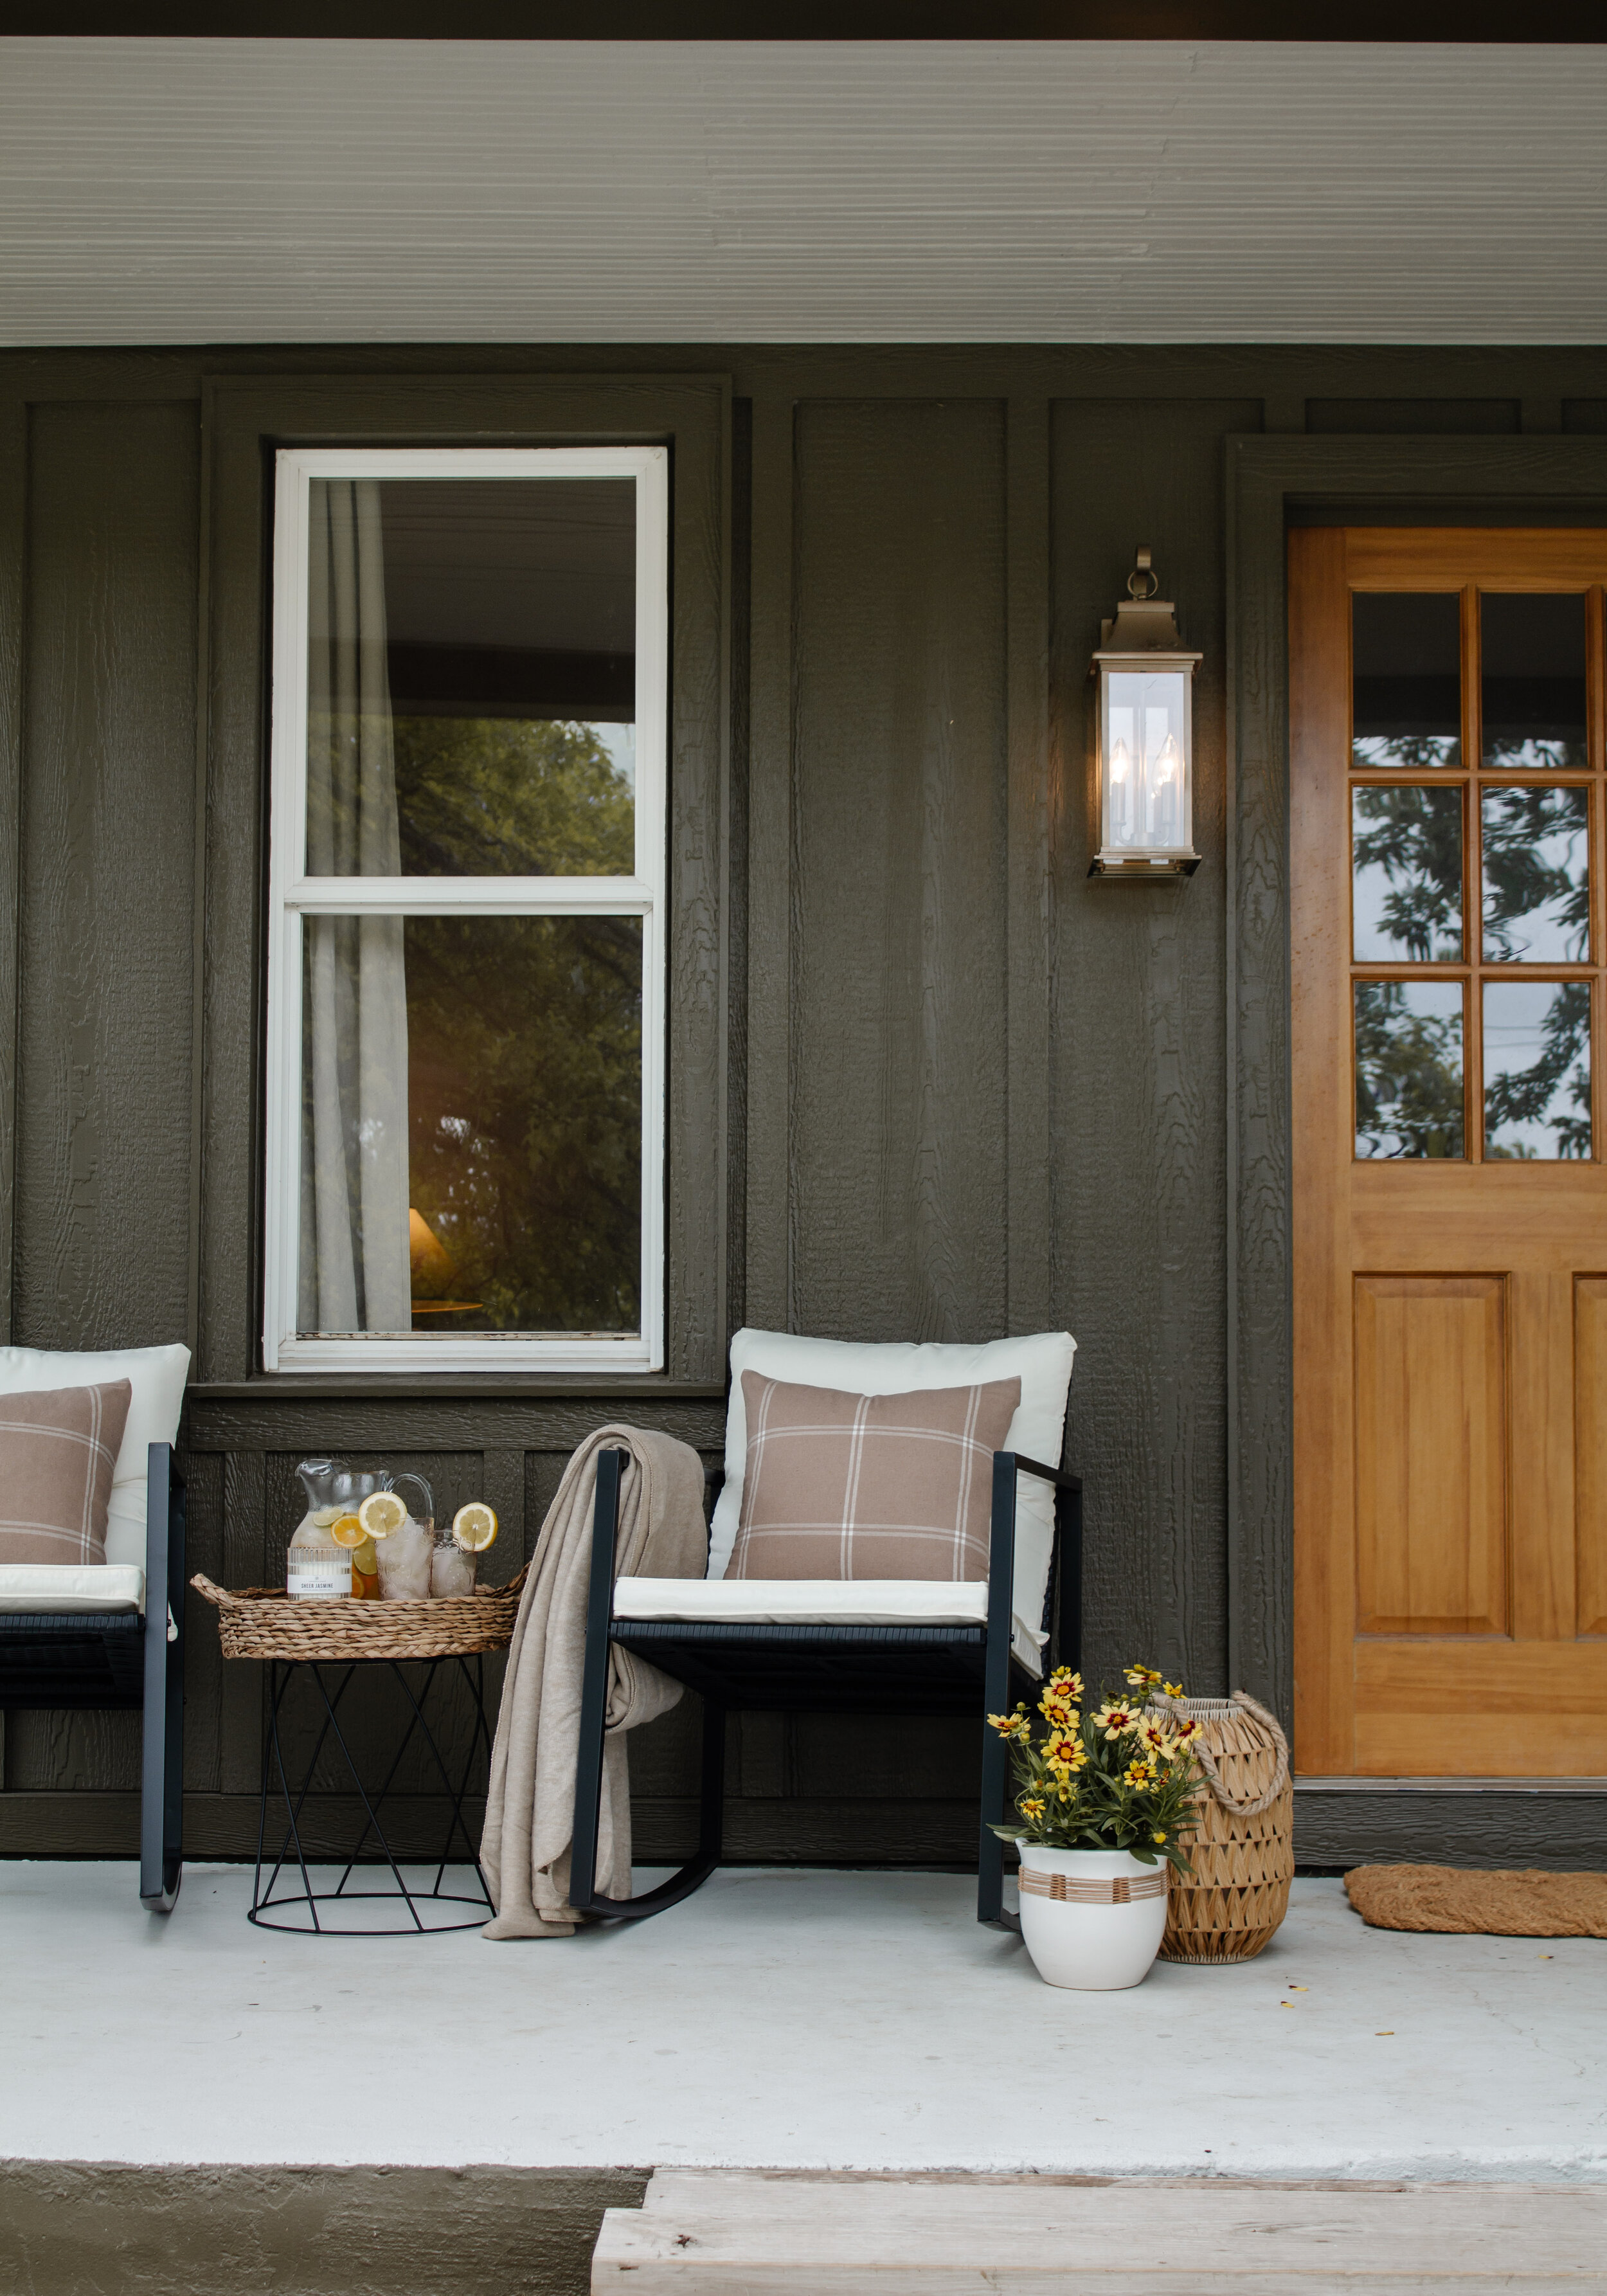 Updating our porch for summer with new seating and decor. Outdoor porch styling tips by Nadine Stay. Walmart home finds. | Nadine Stay